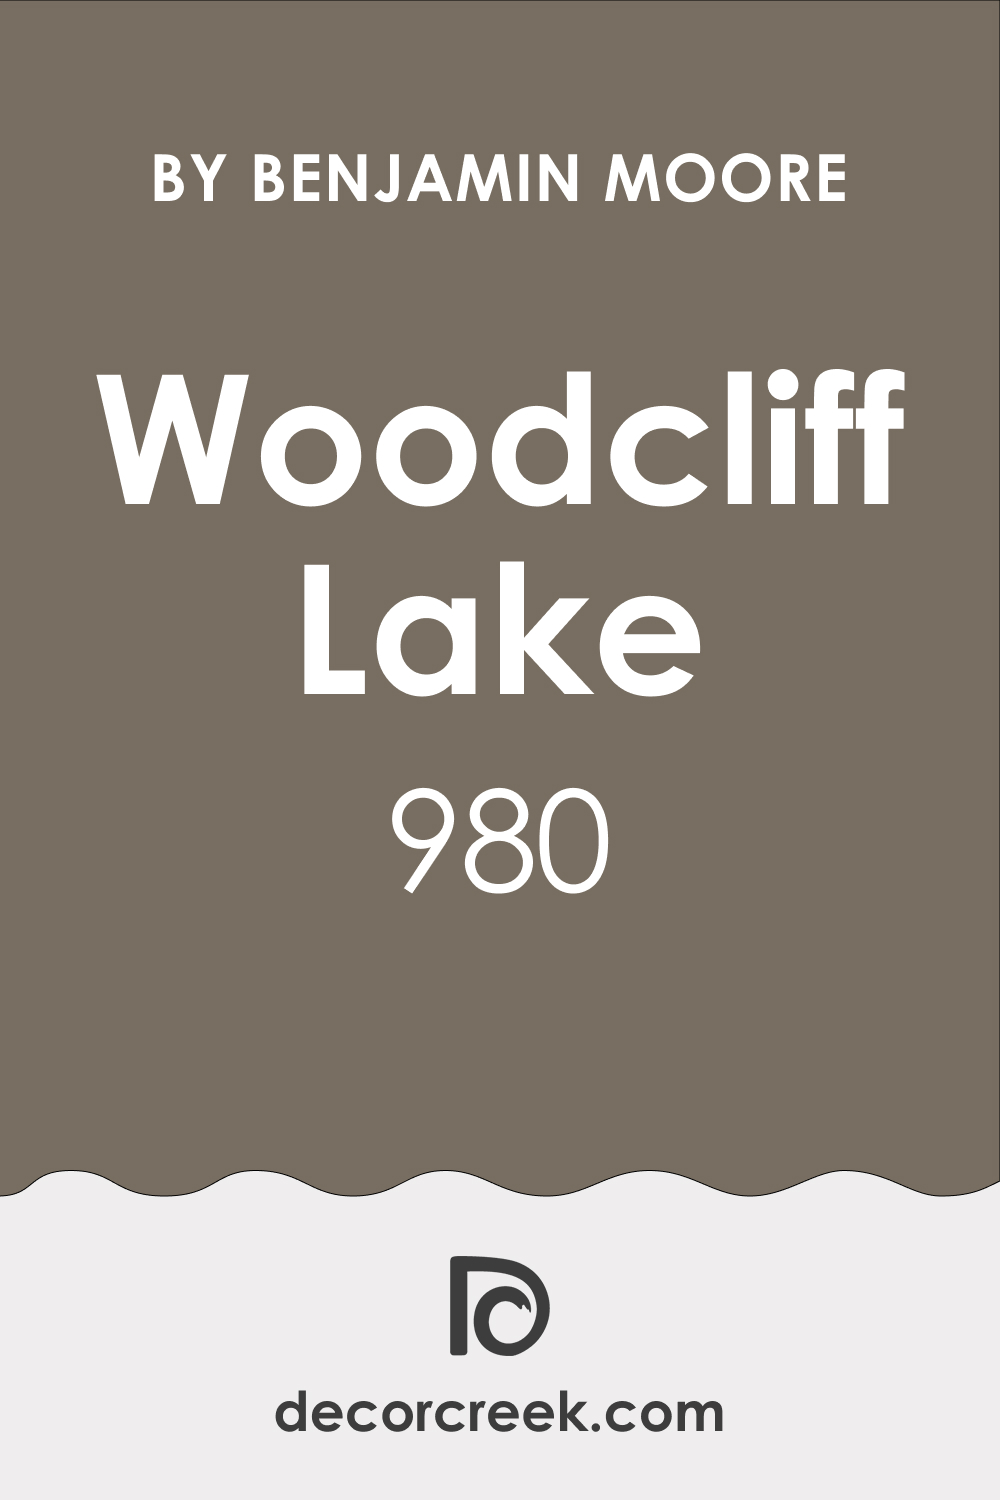 What Color Is Woodcliff Lake 980?